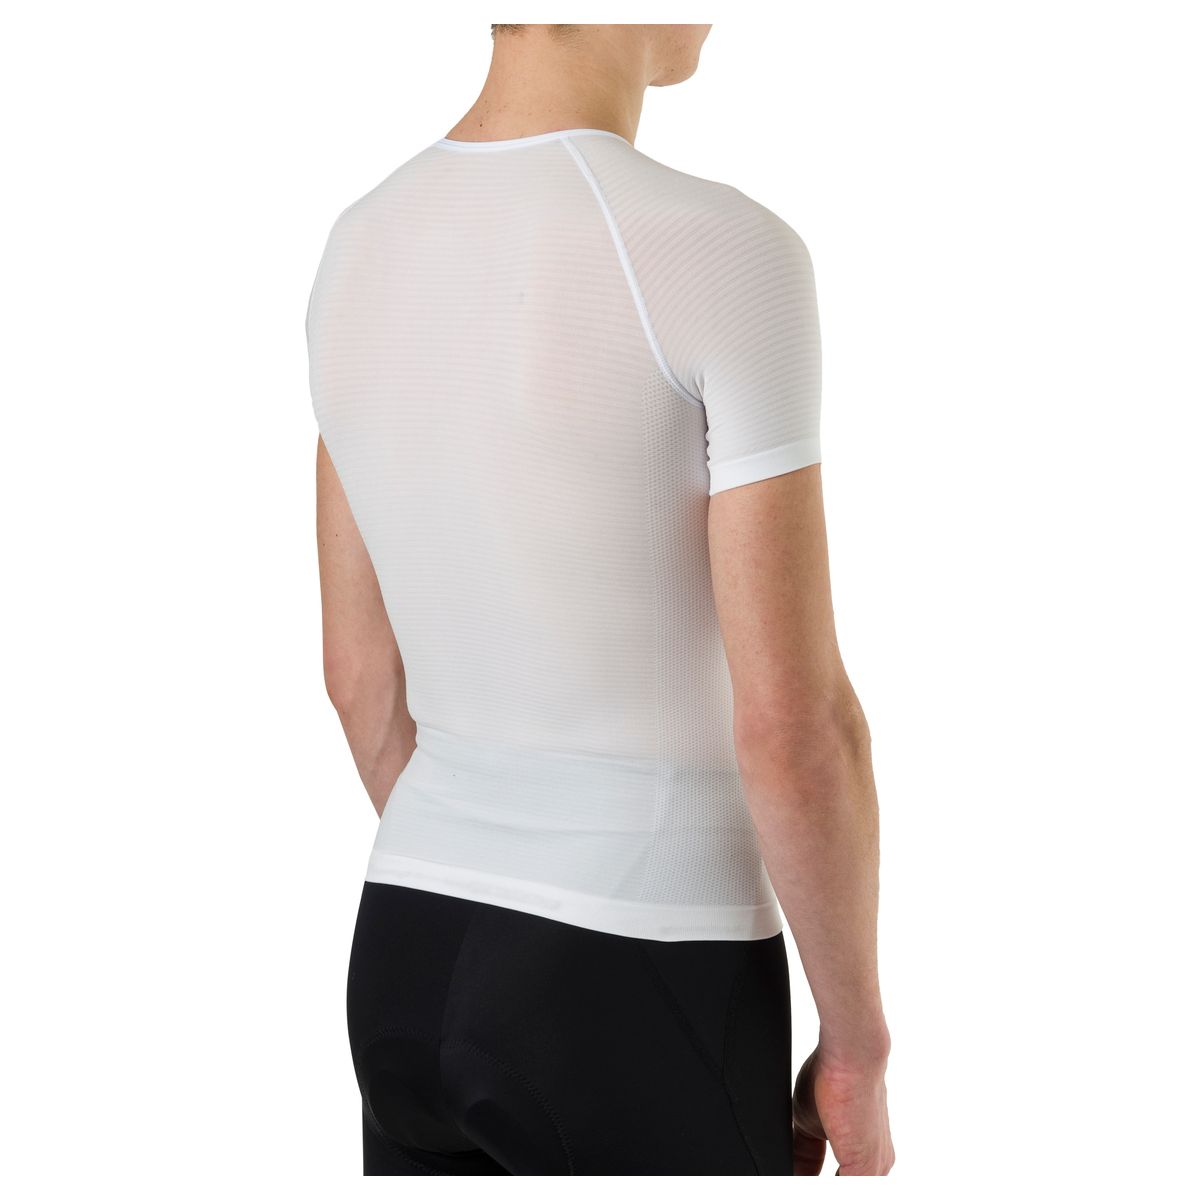 Summerday Base Layer SS fit example